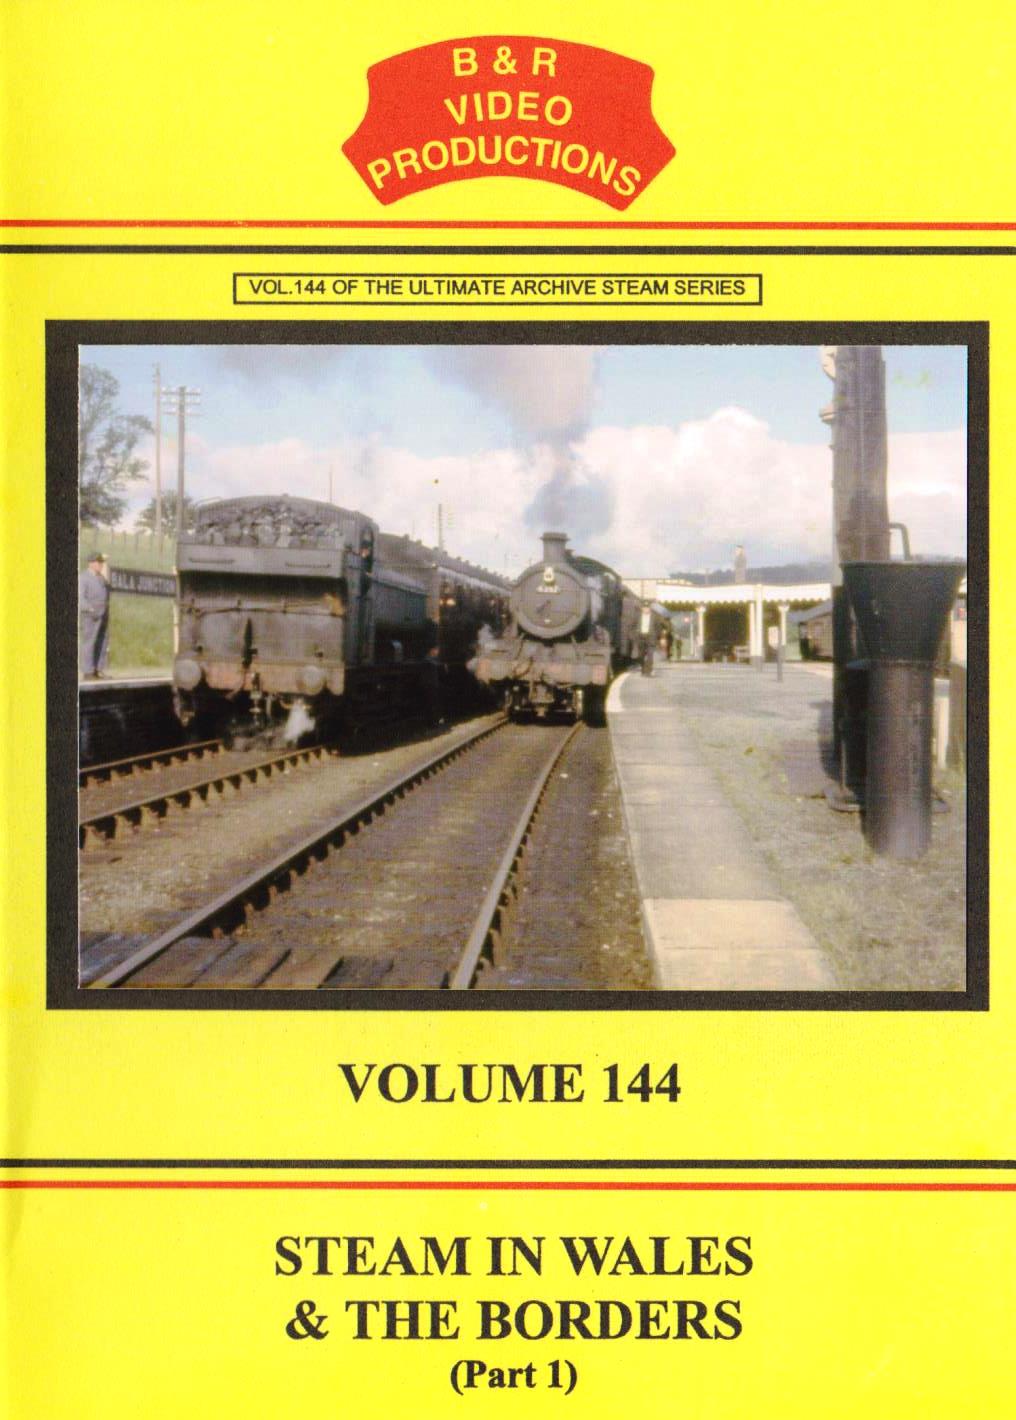 B & R Video Productions Vol 144 - Steam in Wales & the borders (Part 1)